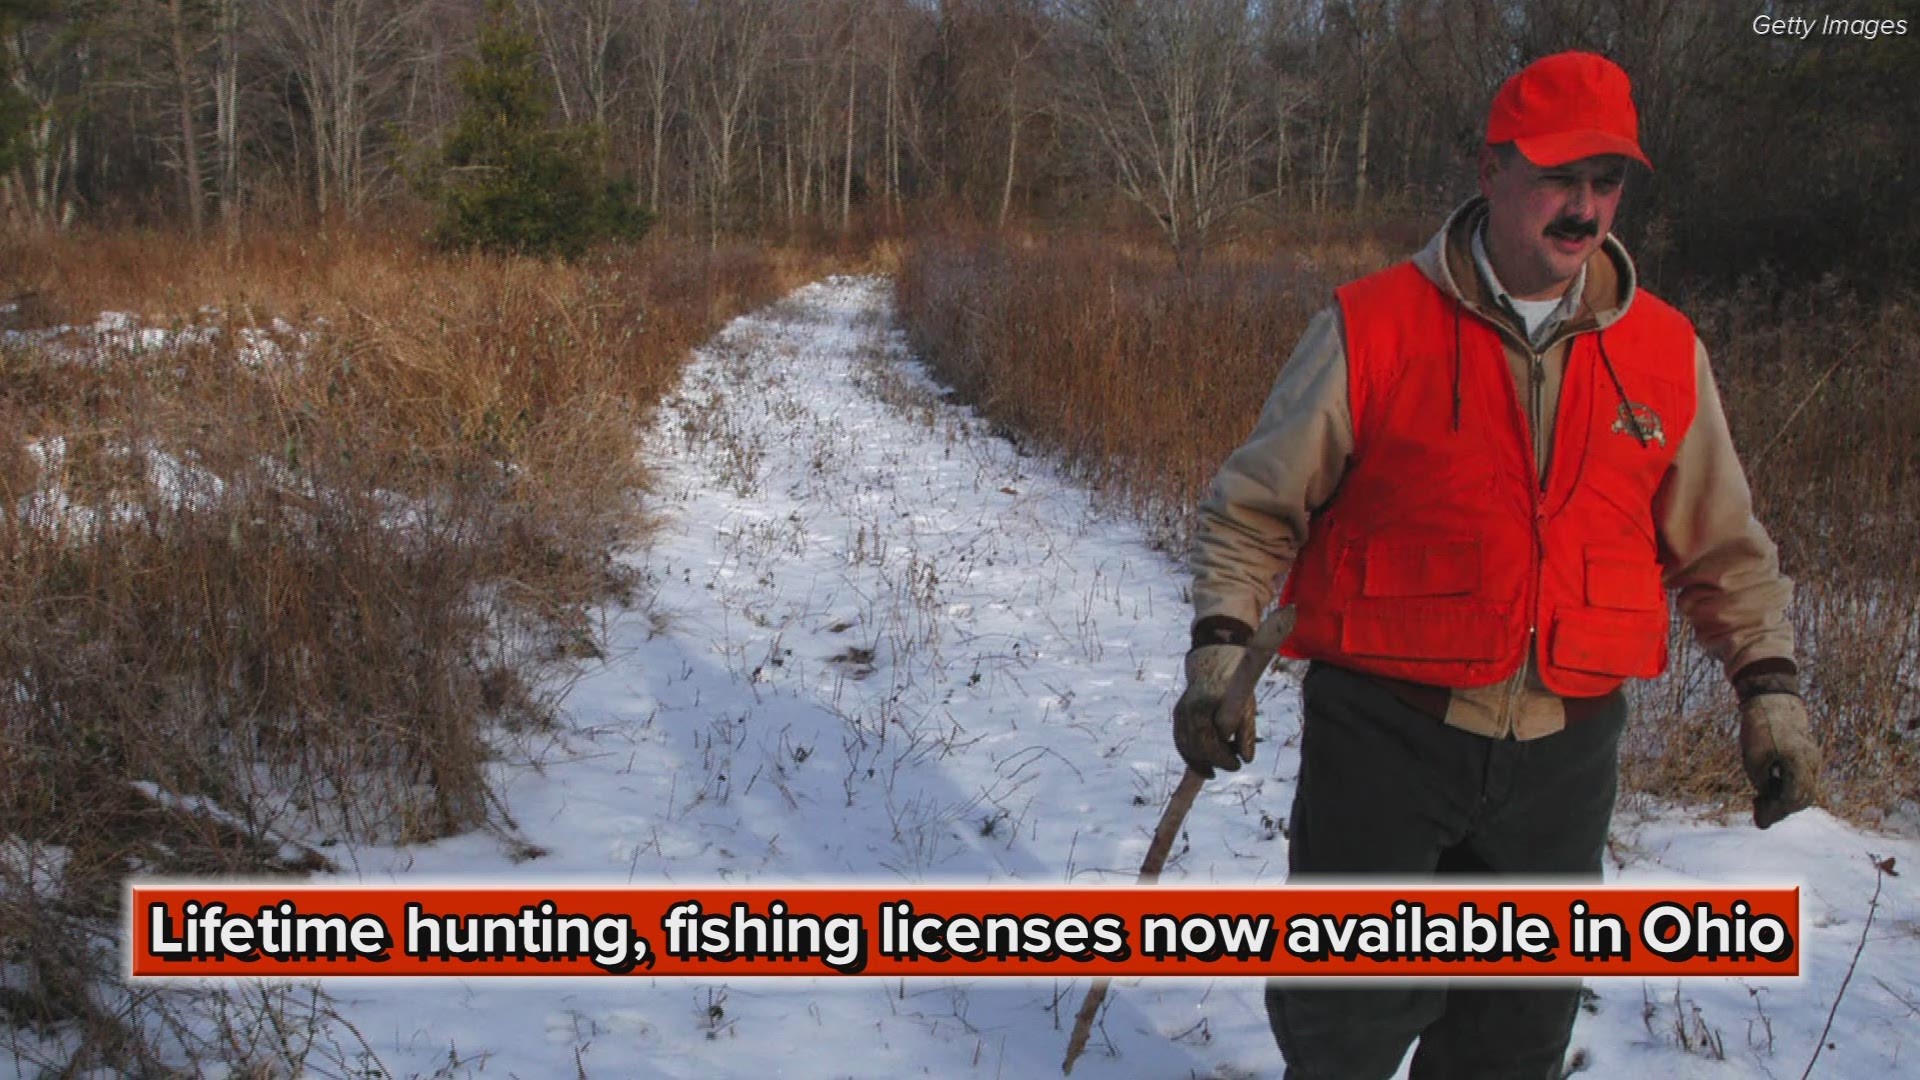 Lifetime hunting, fishing licenses now available in Ohio